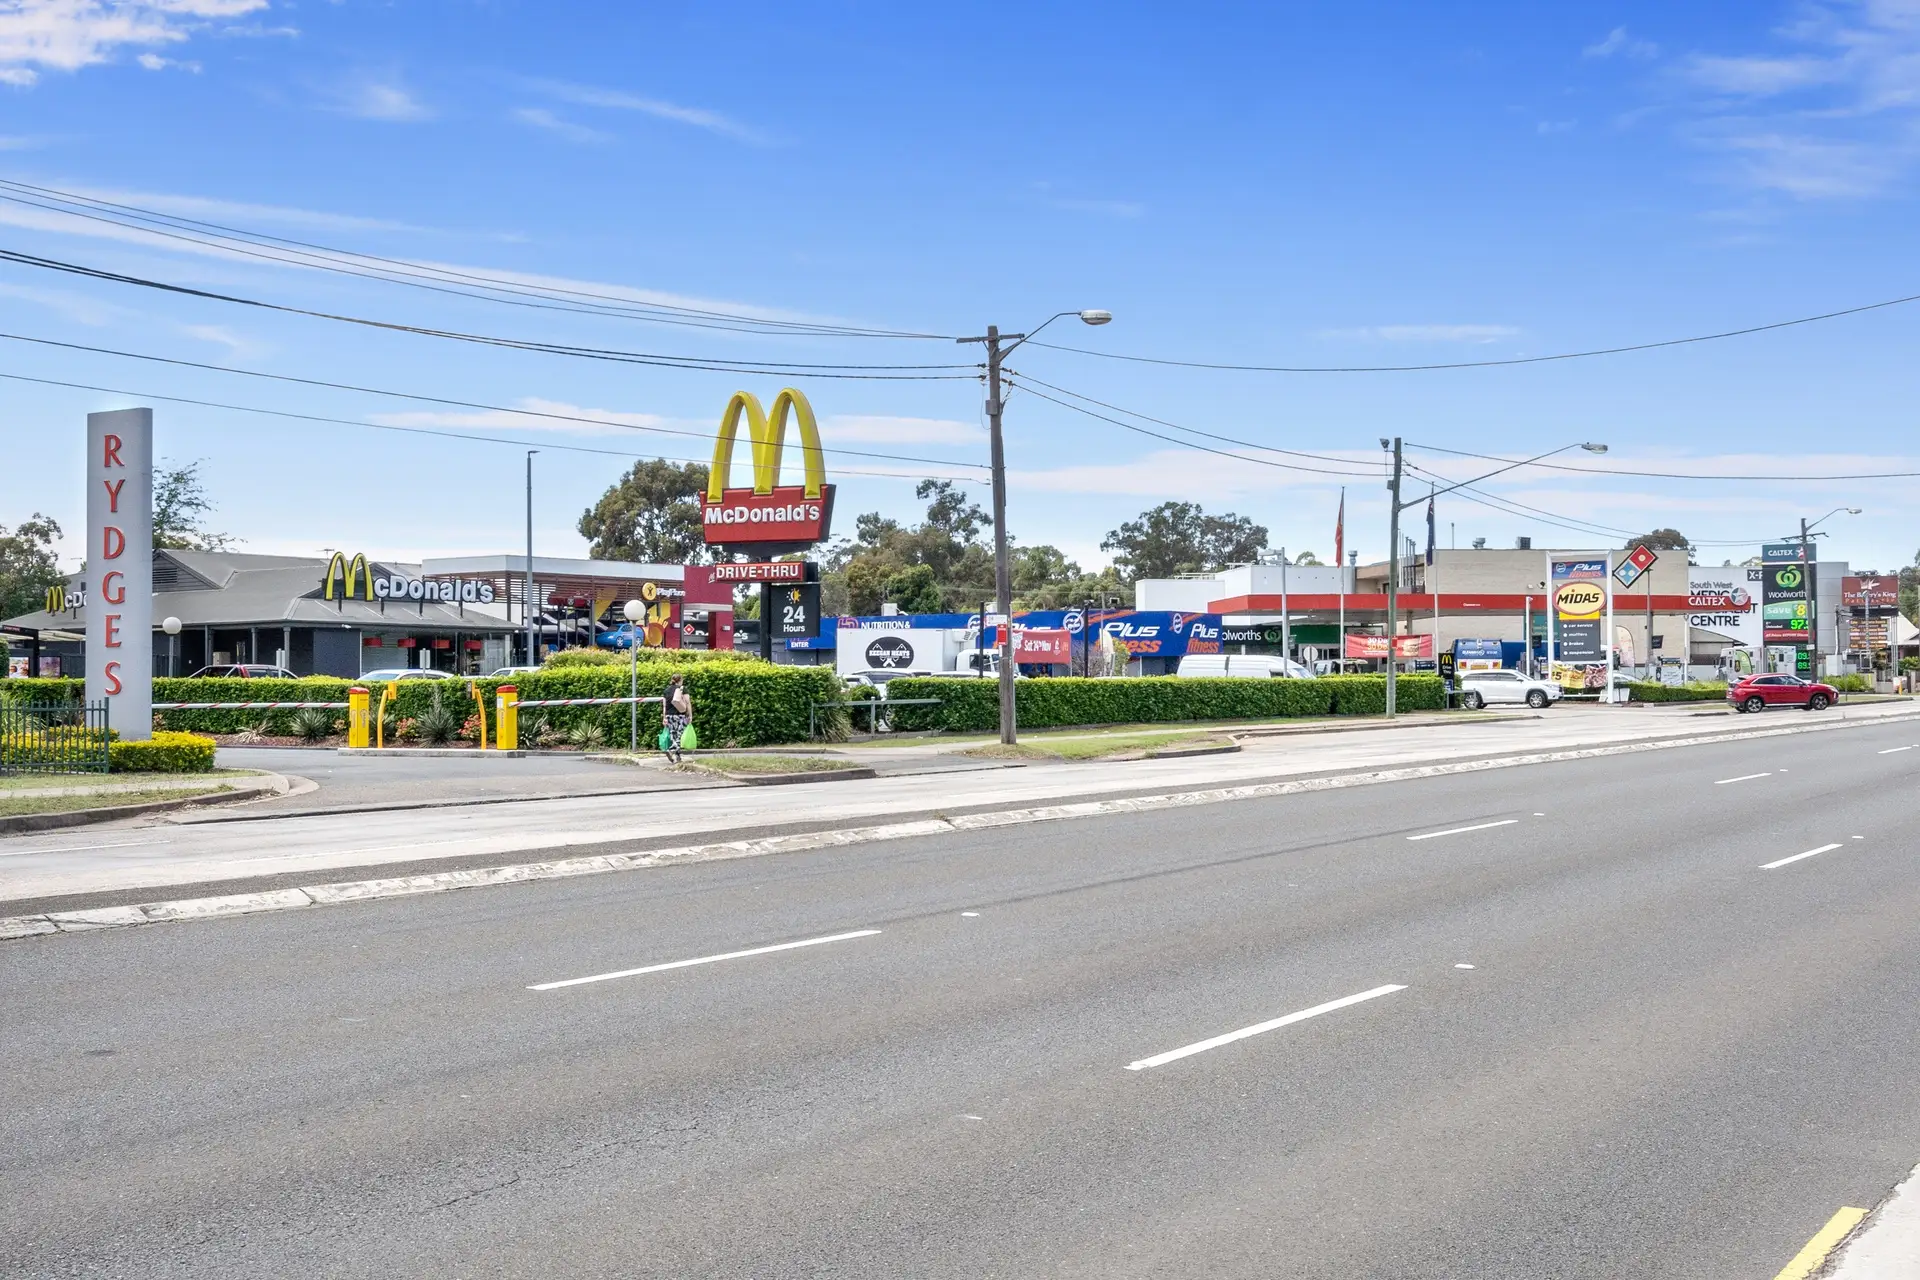 735-737 Hume Highway, Bass Hill Sold by Richard Matthews Real Estate - image 7